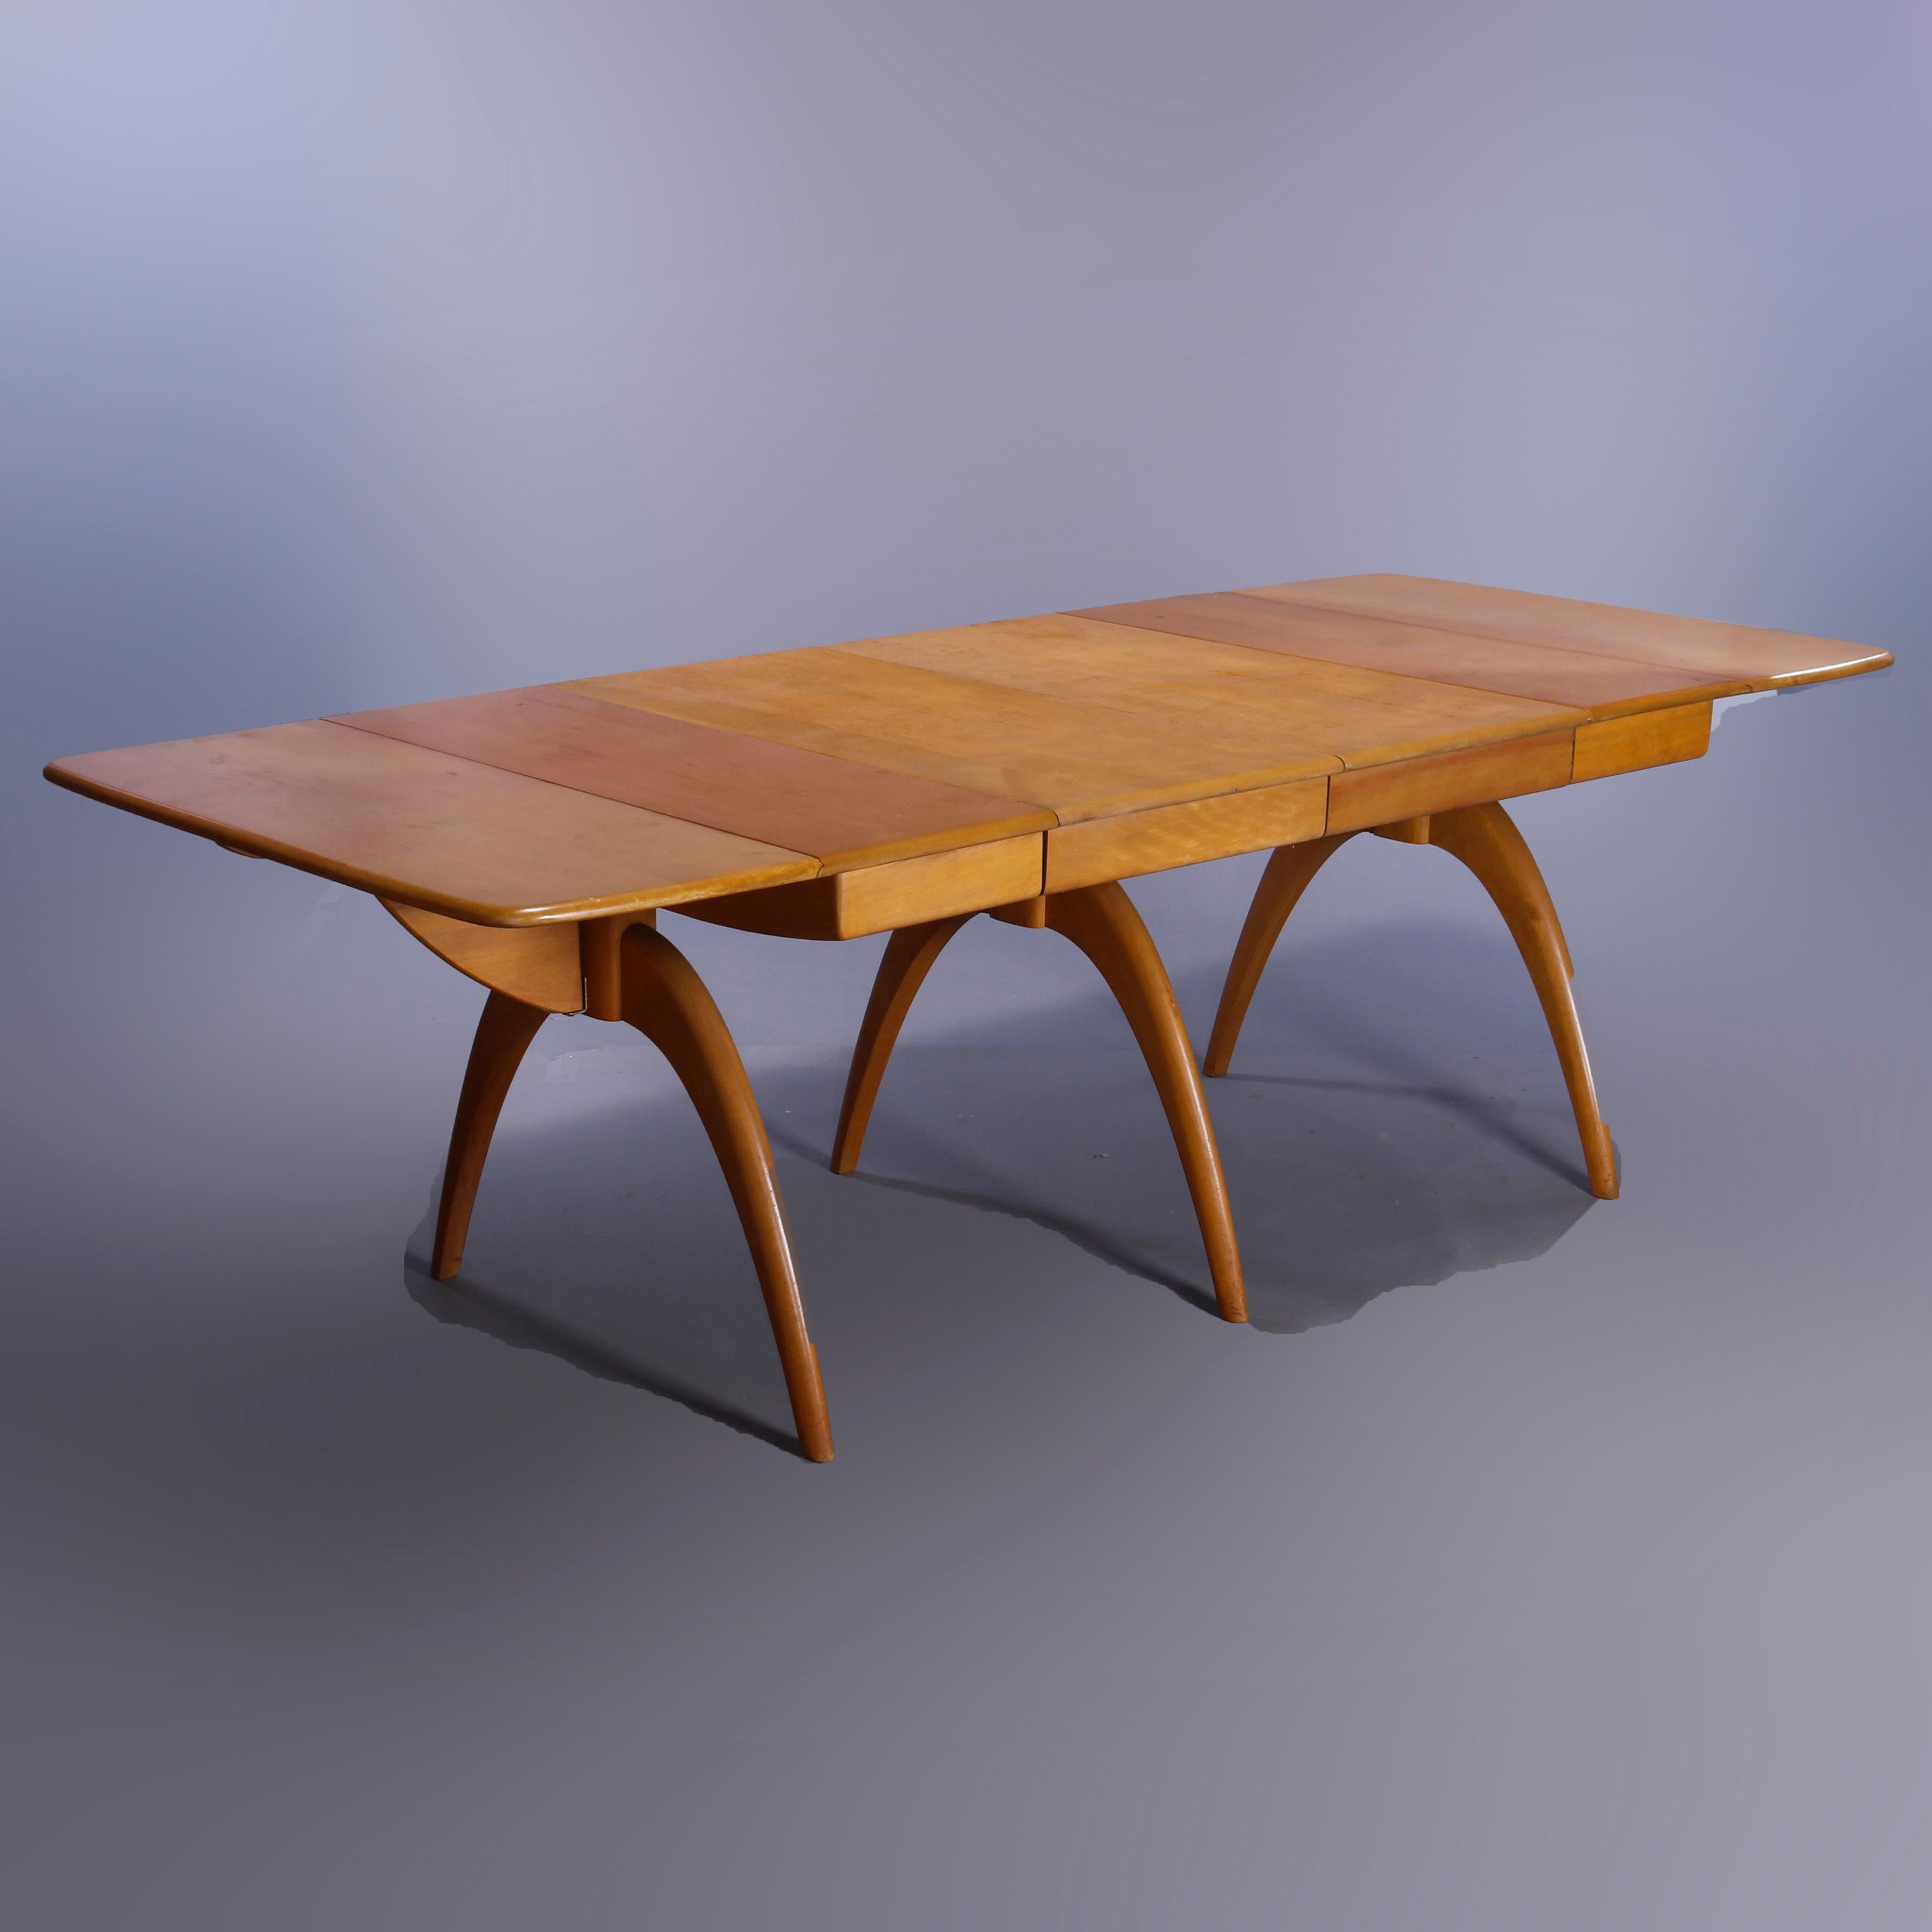 American Mid-Century Modern Heywood Wakefield Dog Bone Extension Dining Table, Champagne